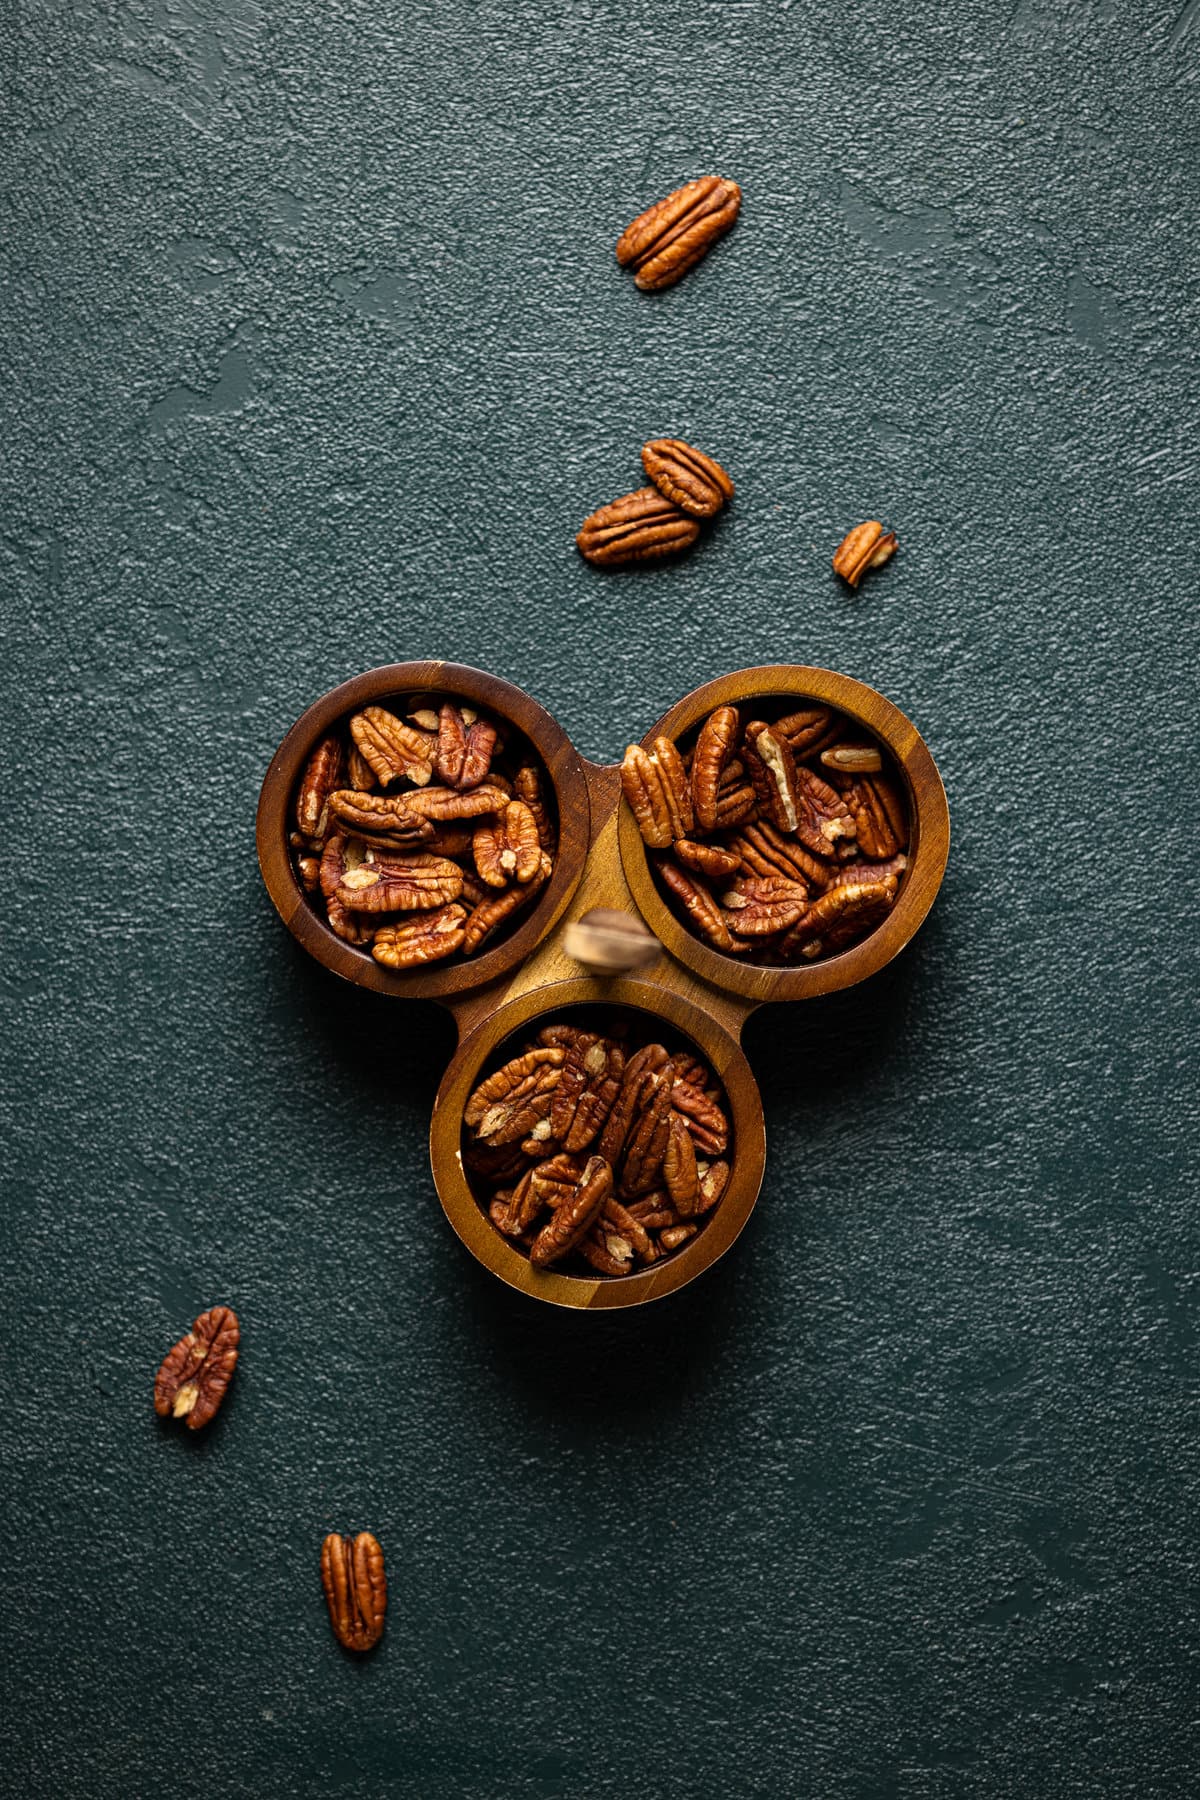 Pecans in three small, wooden bowls